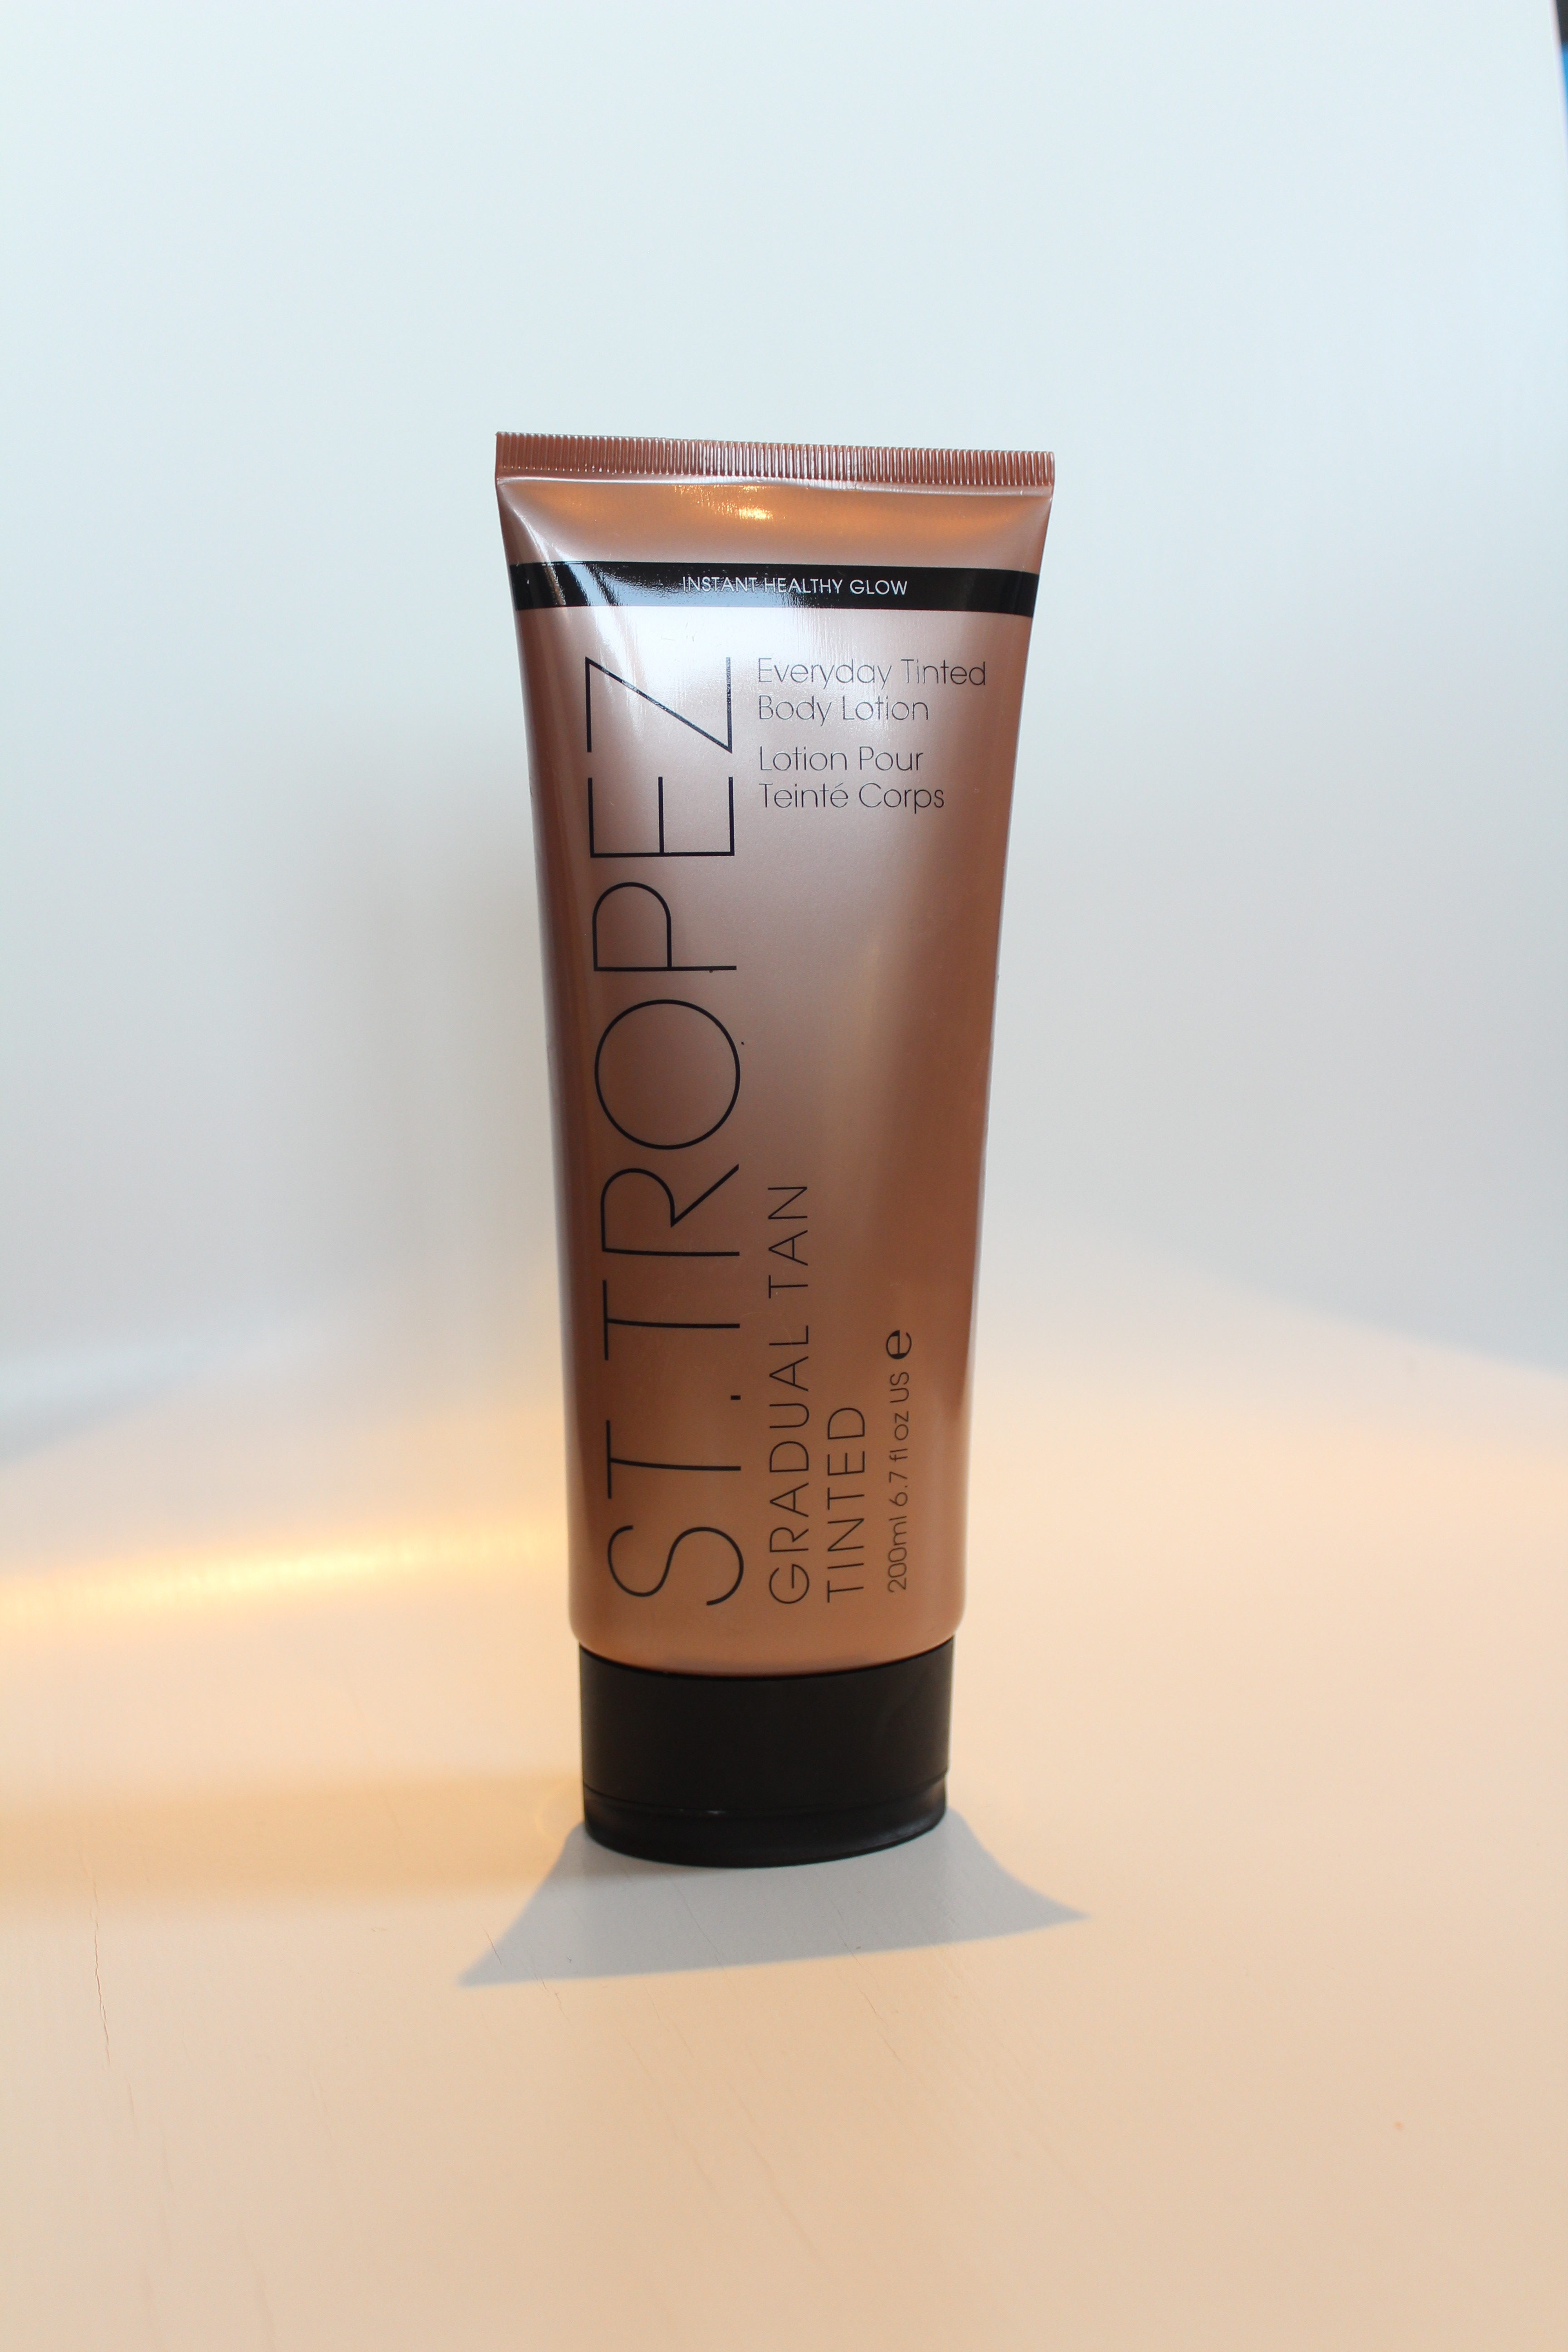 St Tropez Gradual Tan Tinted Everyday Body Lotion Review - Face Made - Beauty Product Reviews, Tutorial Videos & Lifestyle